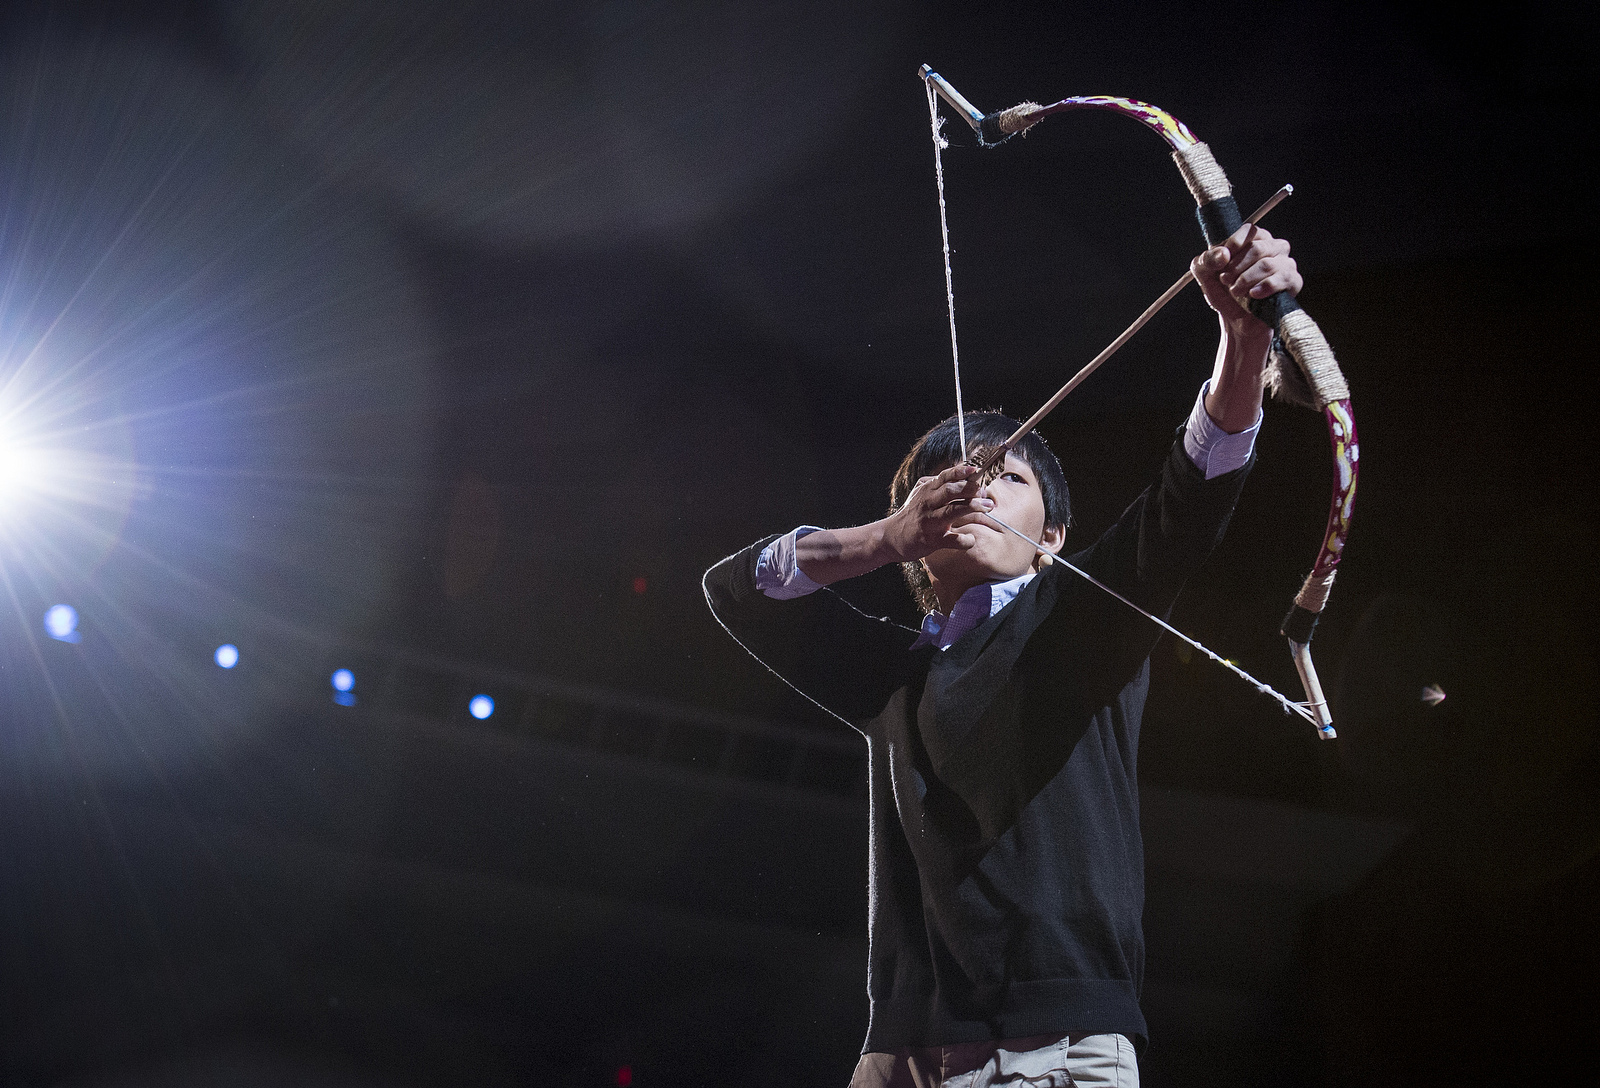 When Dong Woo Jang was giving his talk at TED2013, I knew I had less than a split second to capture the shot I wanted. So well before he demonstrated his bow, I found the angle I wanted, engaged my camera’s high-speed burst mode, and waited for him to casually pick up the bow, turn, aim at his target, and fire. It happened so fast that even at nine frames a second, there’s this frame, and then the next where the arrow is leaving the bow. Nothing more. Photo: James Duncan Davidson/TED